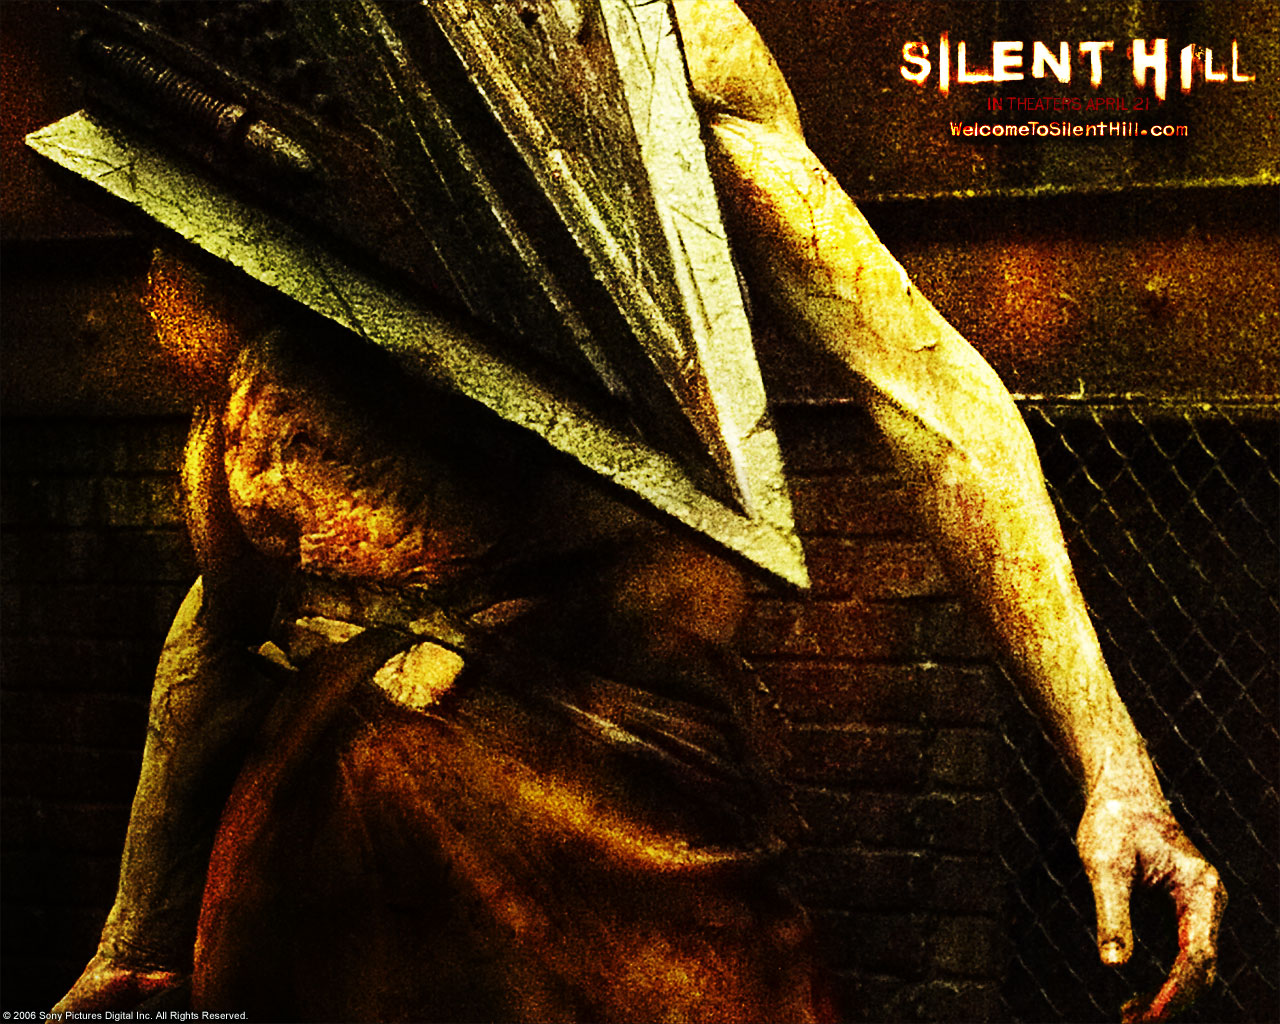 Previous, Movies - Films S - Silent Hill wallpaper